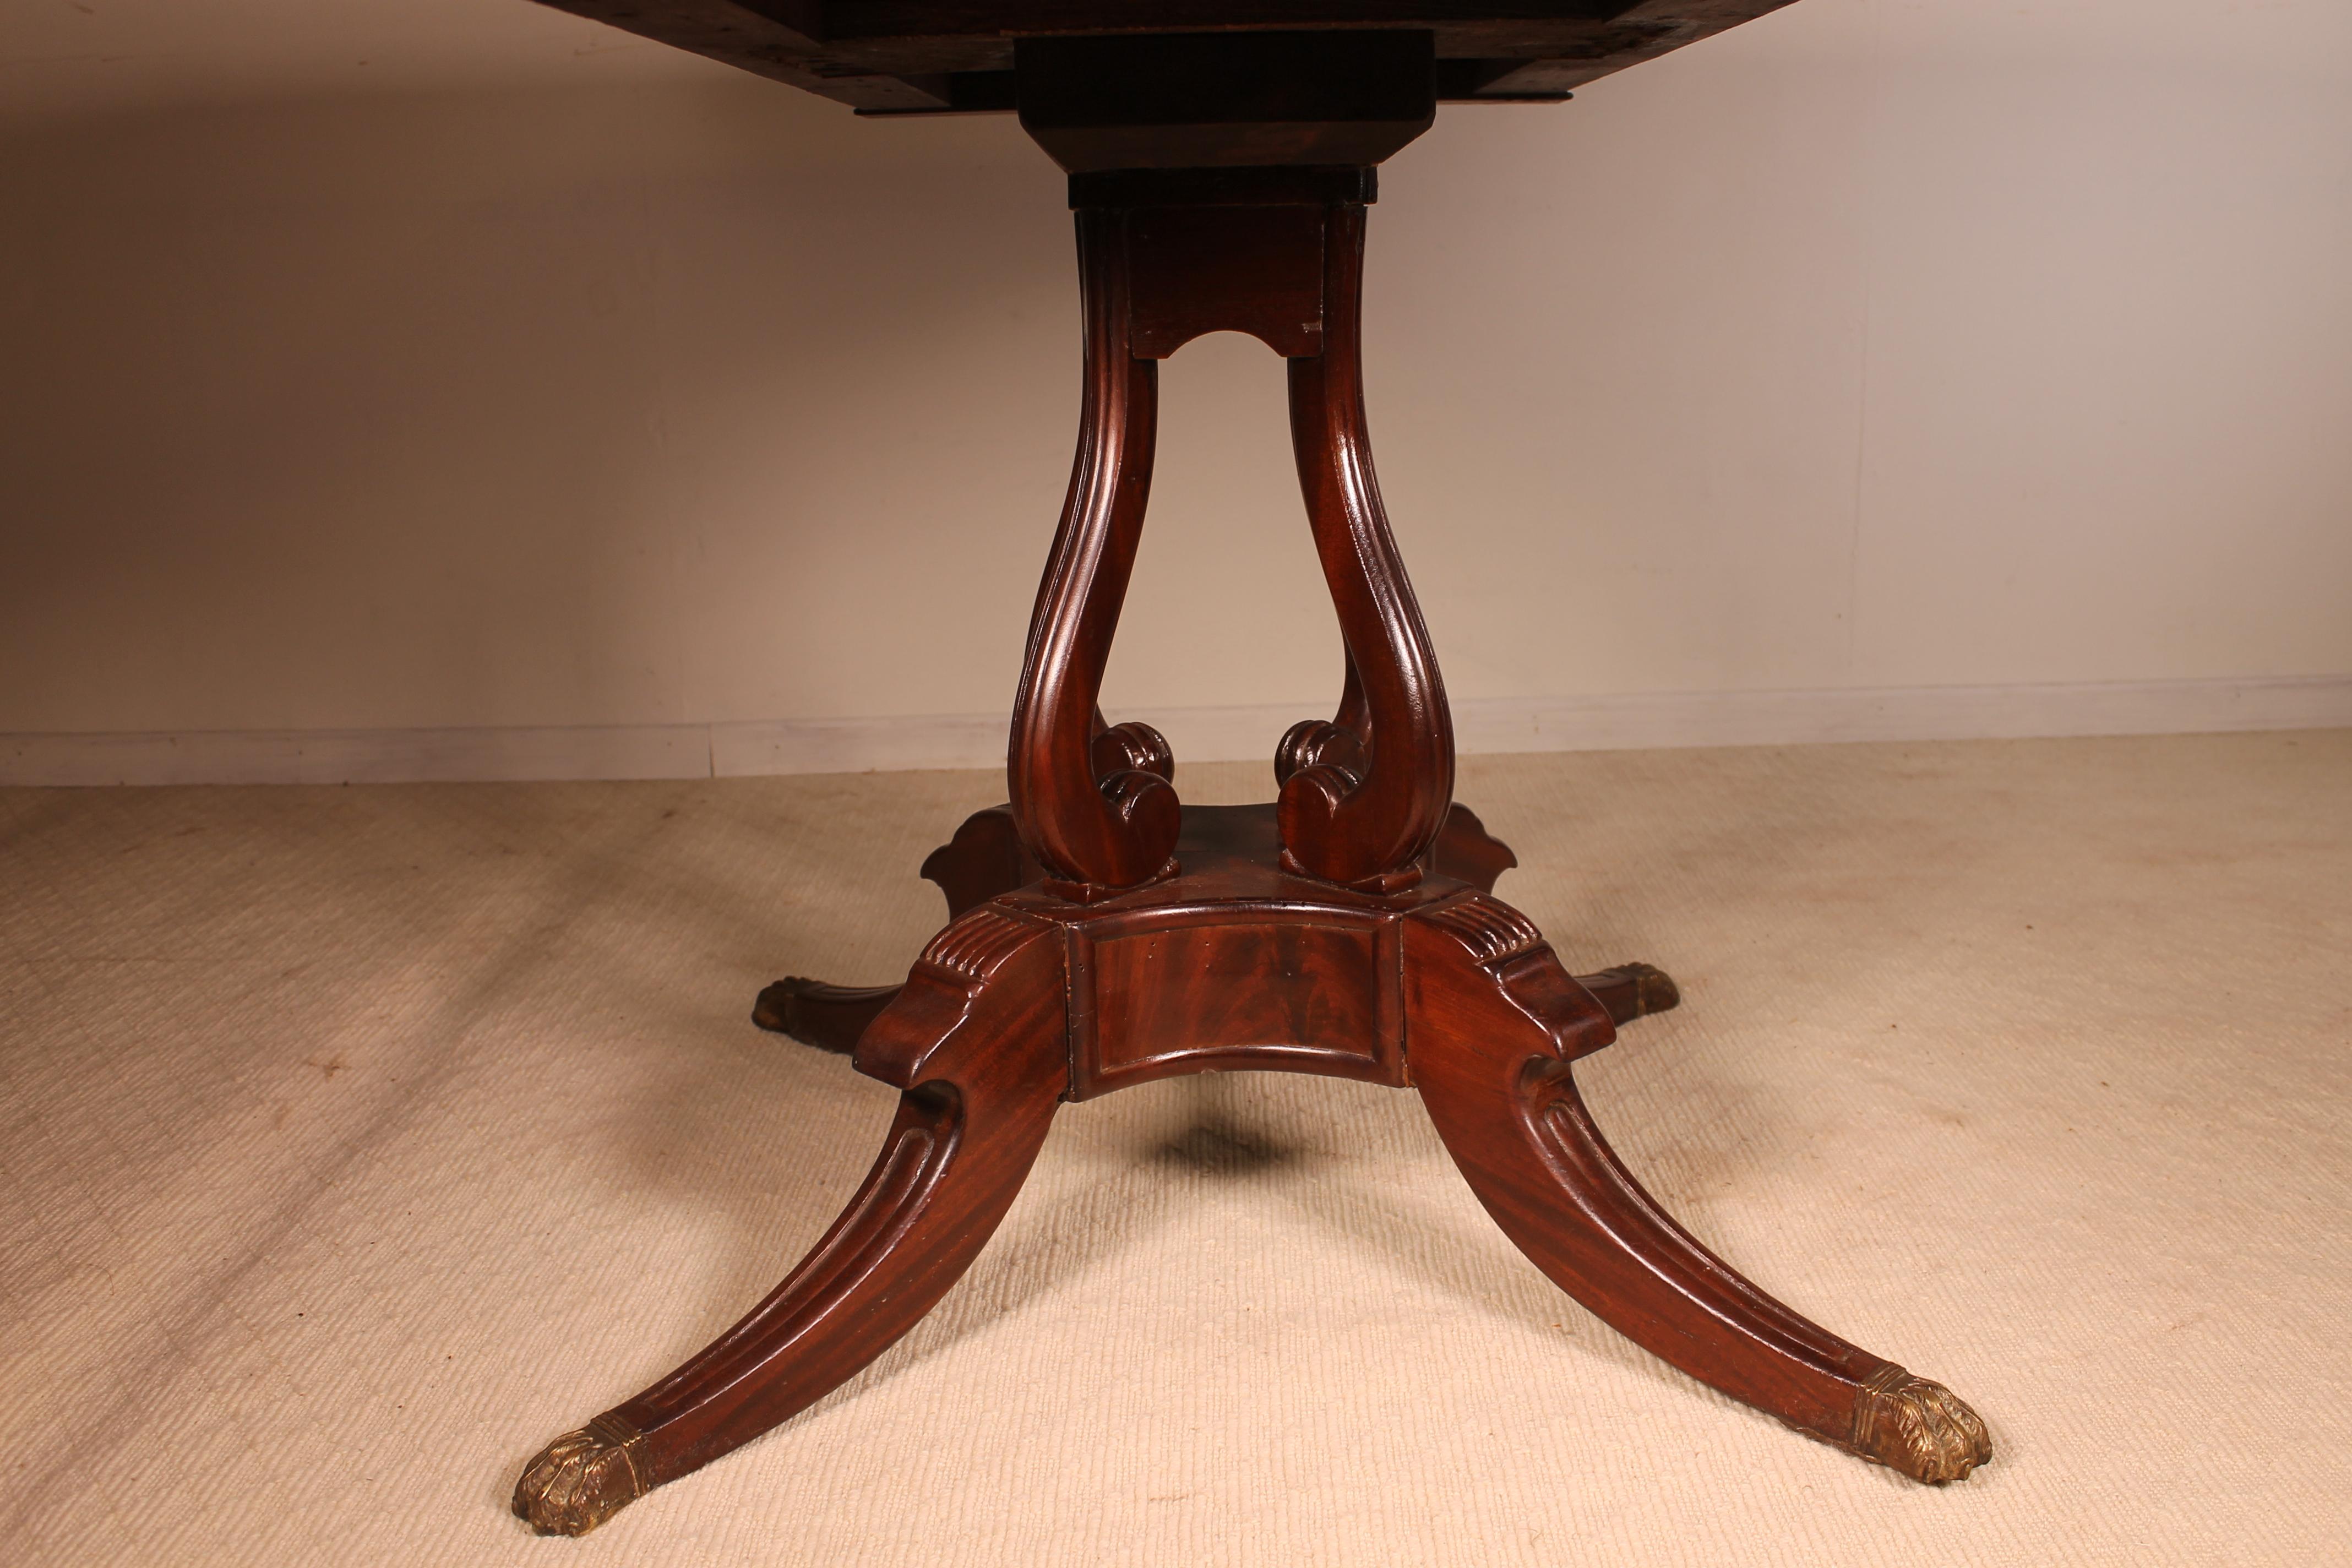 A very beautiful regency pembroke table in mahogany dating from the first part of the 19th century circa 1820.
This fine antique piece has a very beautiful massif mahogany top that rest on a on four fluted uprights on a quadripartite base. The base